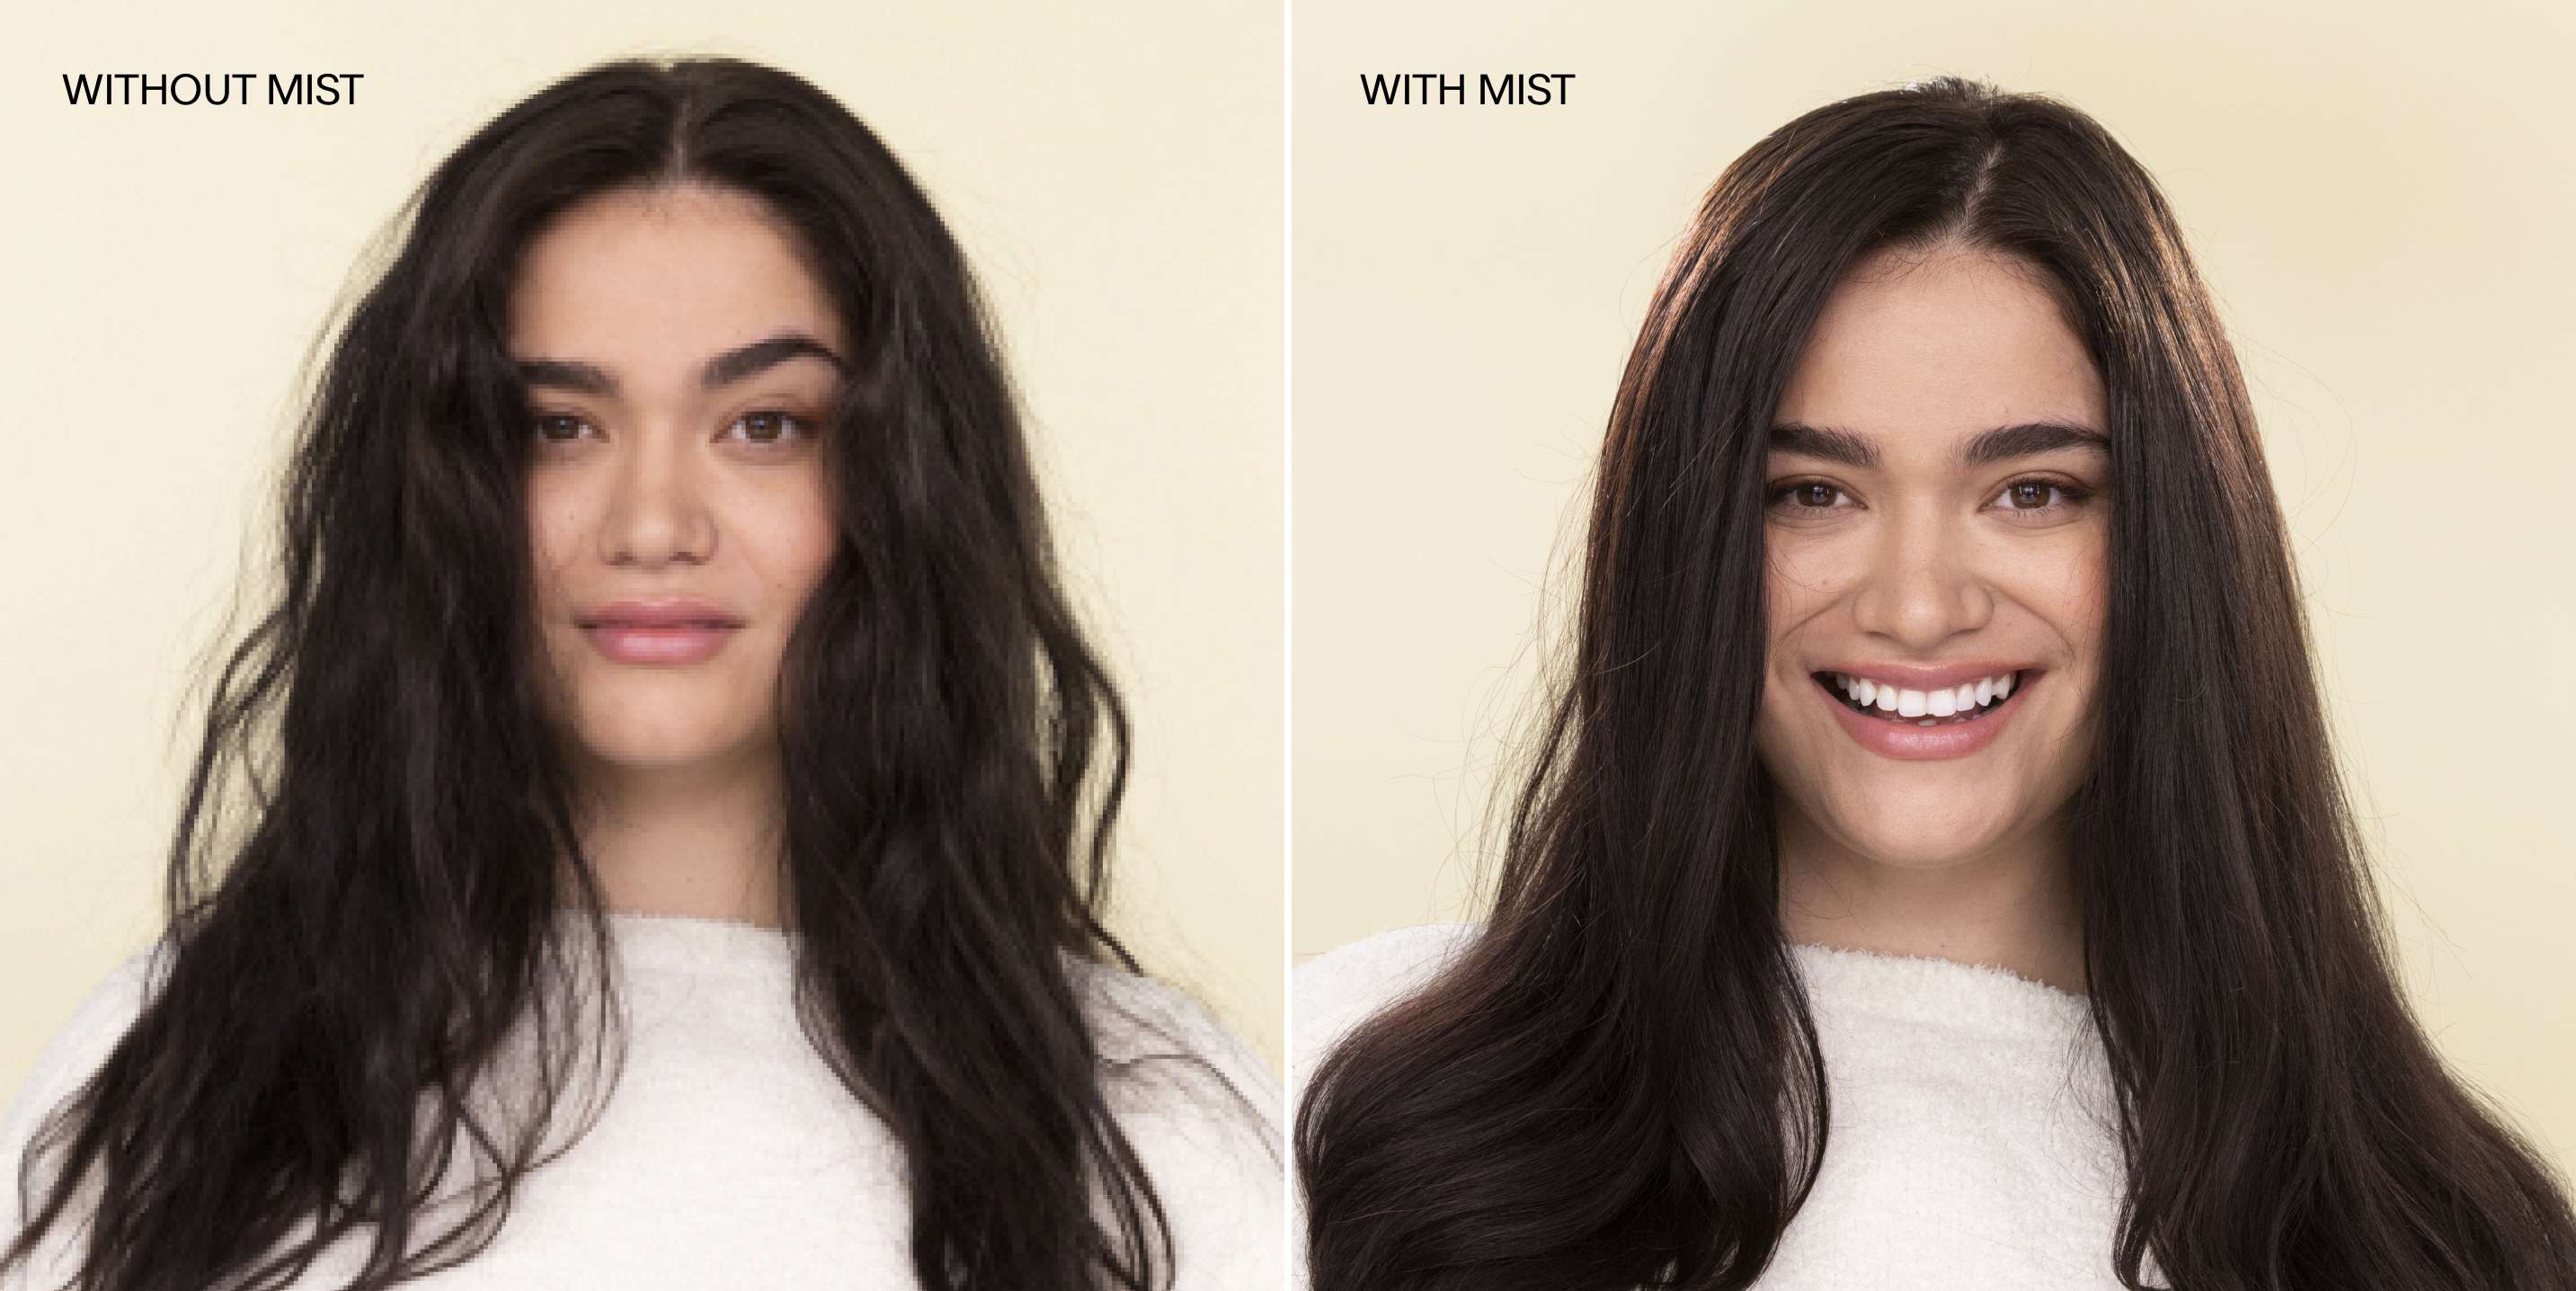 Model with long dark brown hair on a cream background. Left image shows image of model without Complete Conditioning Mist in hair, right image shows model with Complete Conditioning Mist in hair. 